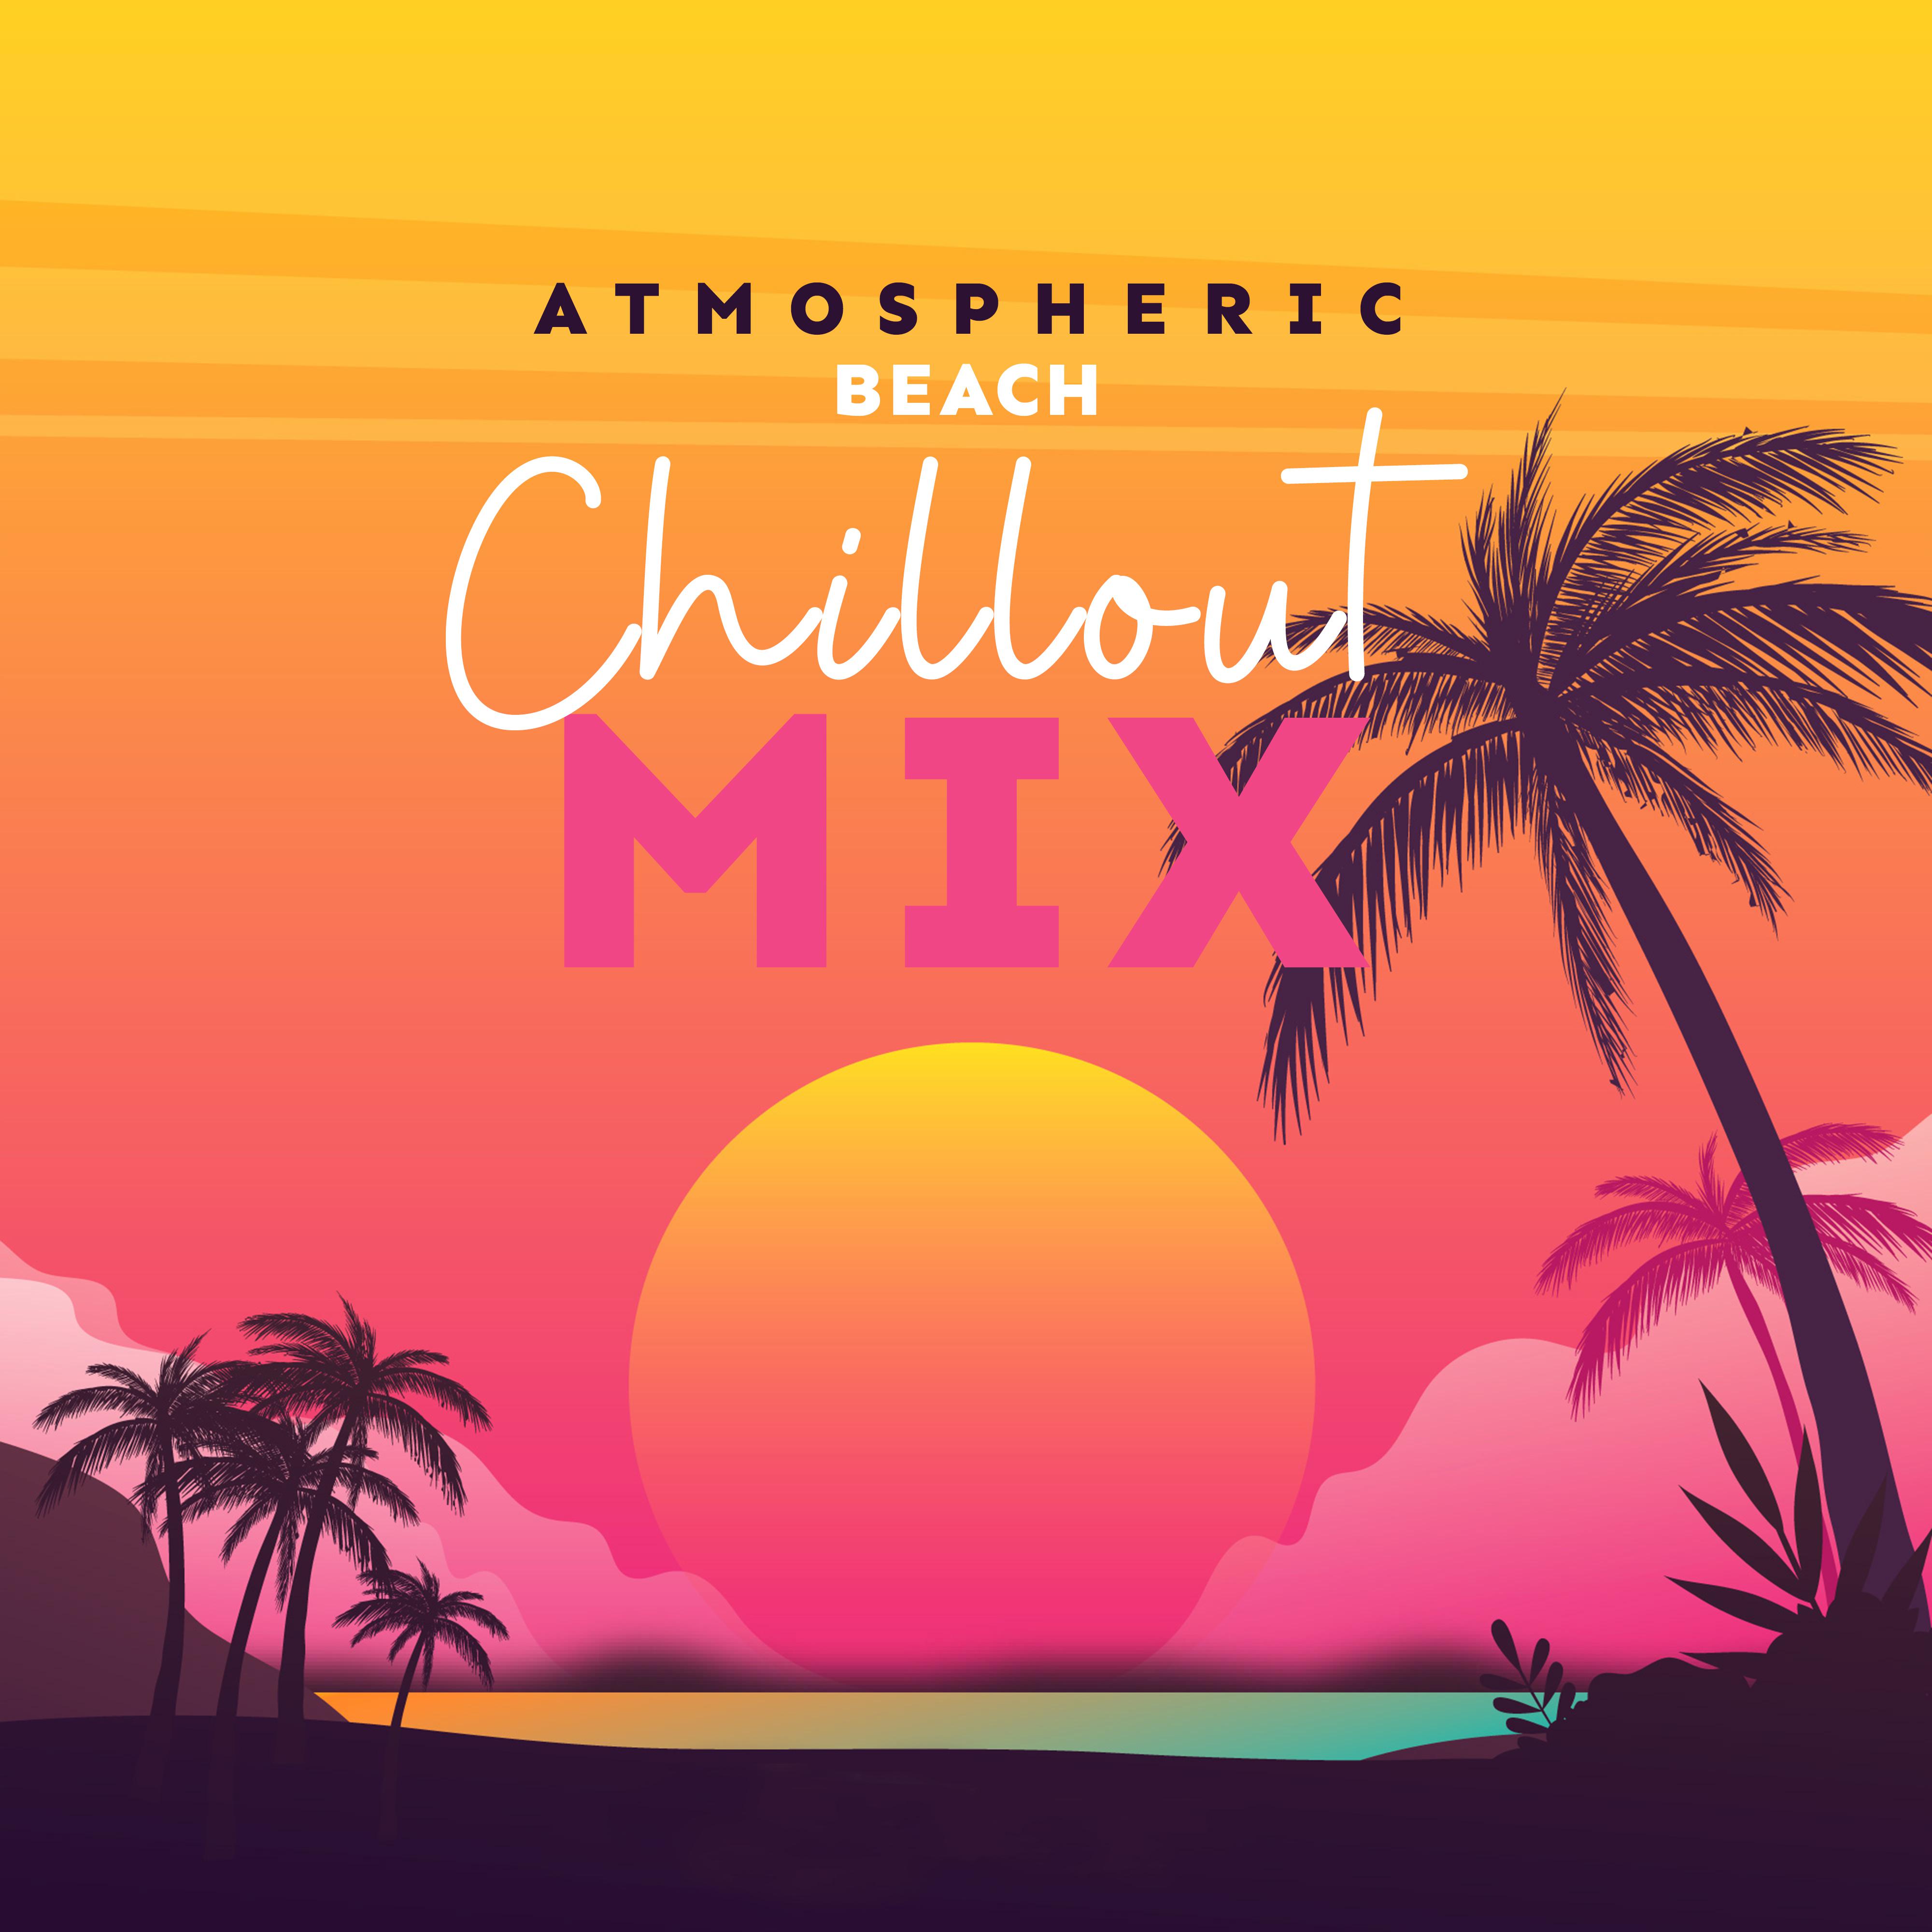 Atmospheric Beach Chillout Mix: 2019 Electro Chill Out Music, Deep Ambients & Positive Beats for Summer Vacation, Most Relaxing Holiday Vibes, Best Relaxation on the Beach Background